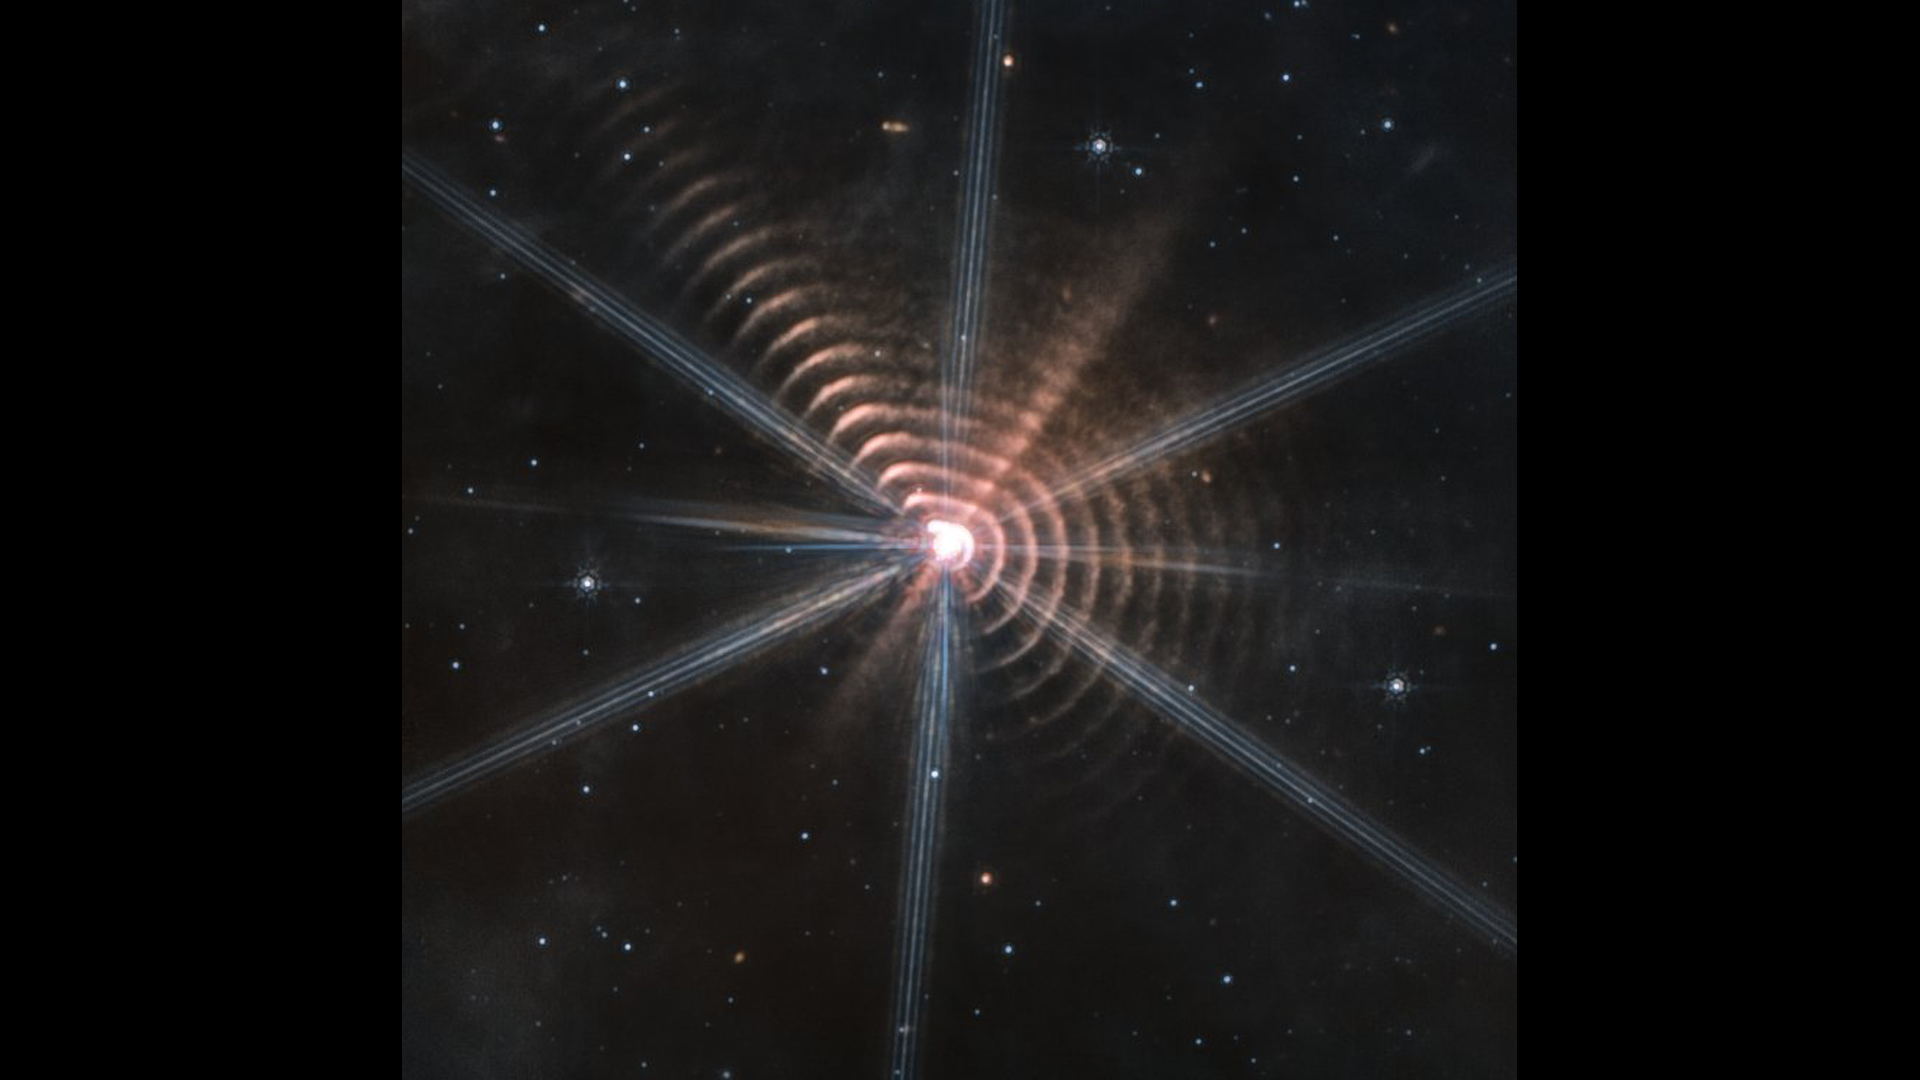 Bizarre rings spied by James Webb Space Telescope are organic dust  propelled by starlight | Space